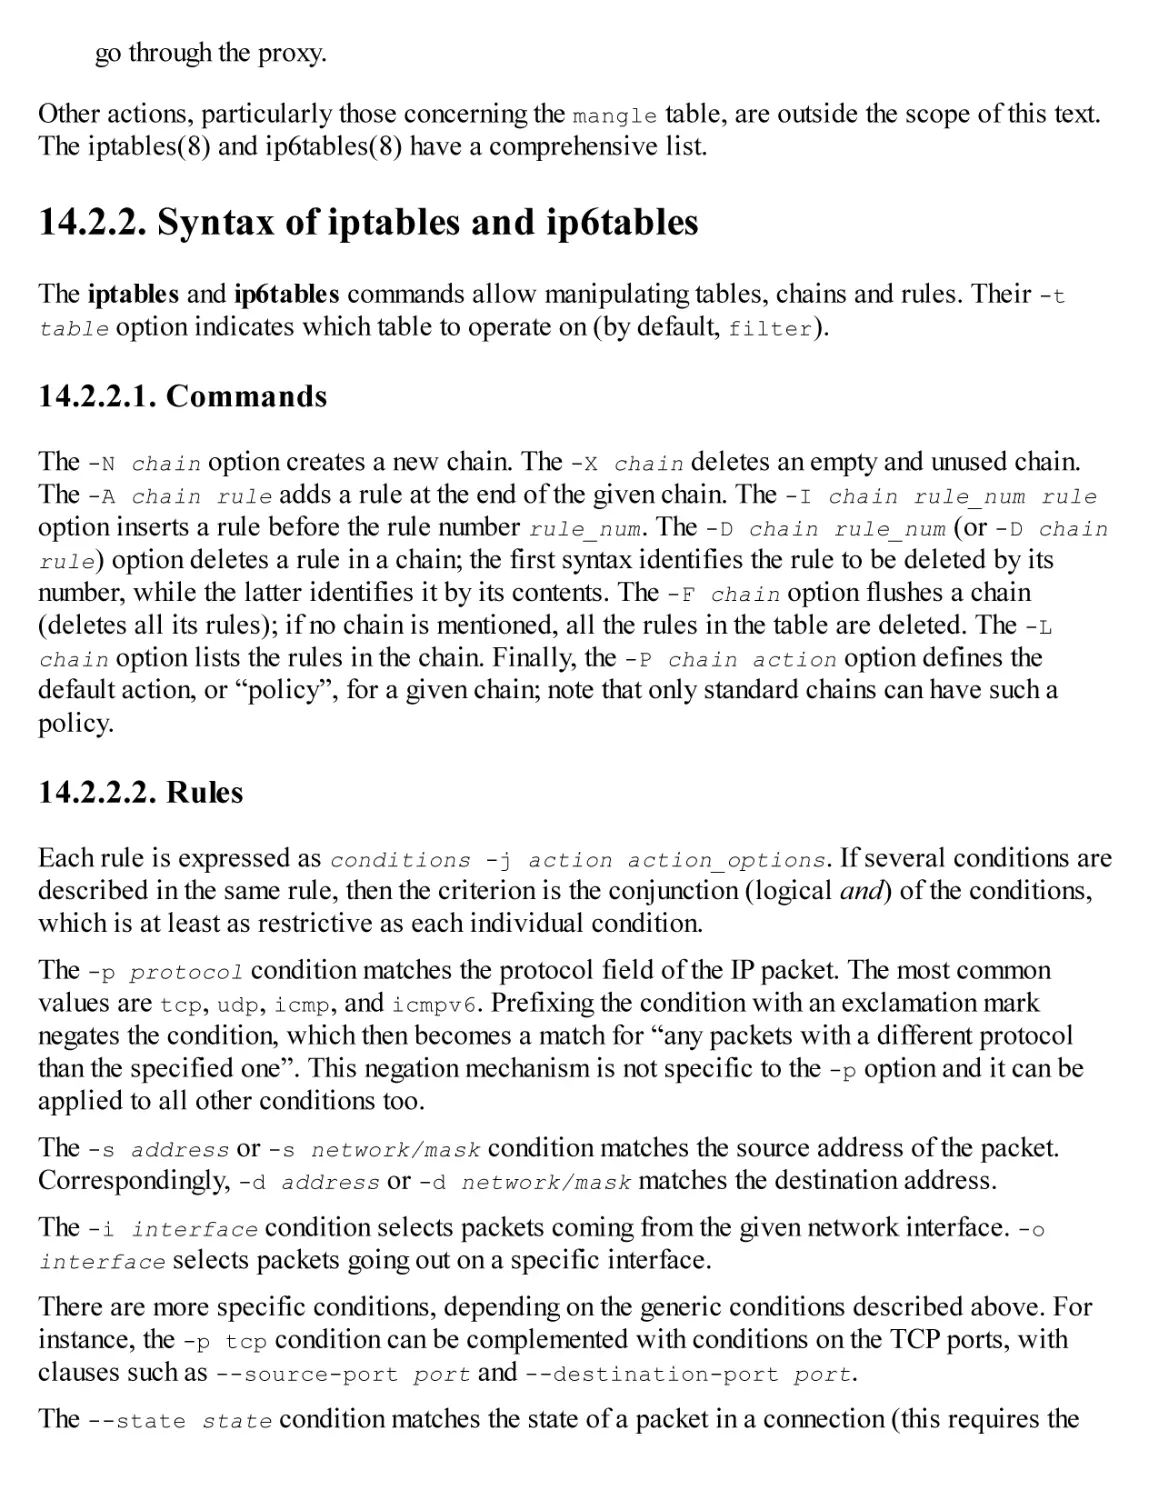 14.2.2. Syntax of iptables and ip6tables
14.2.2.1. Commands
14.2.2.2. Rules